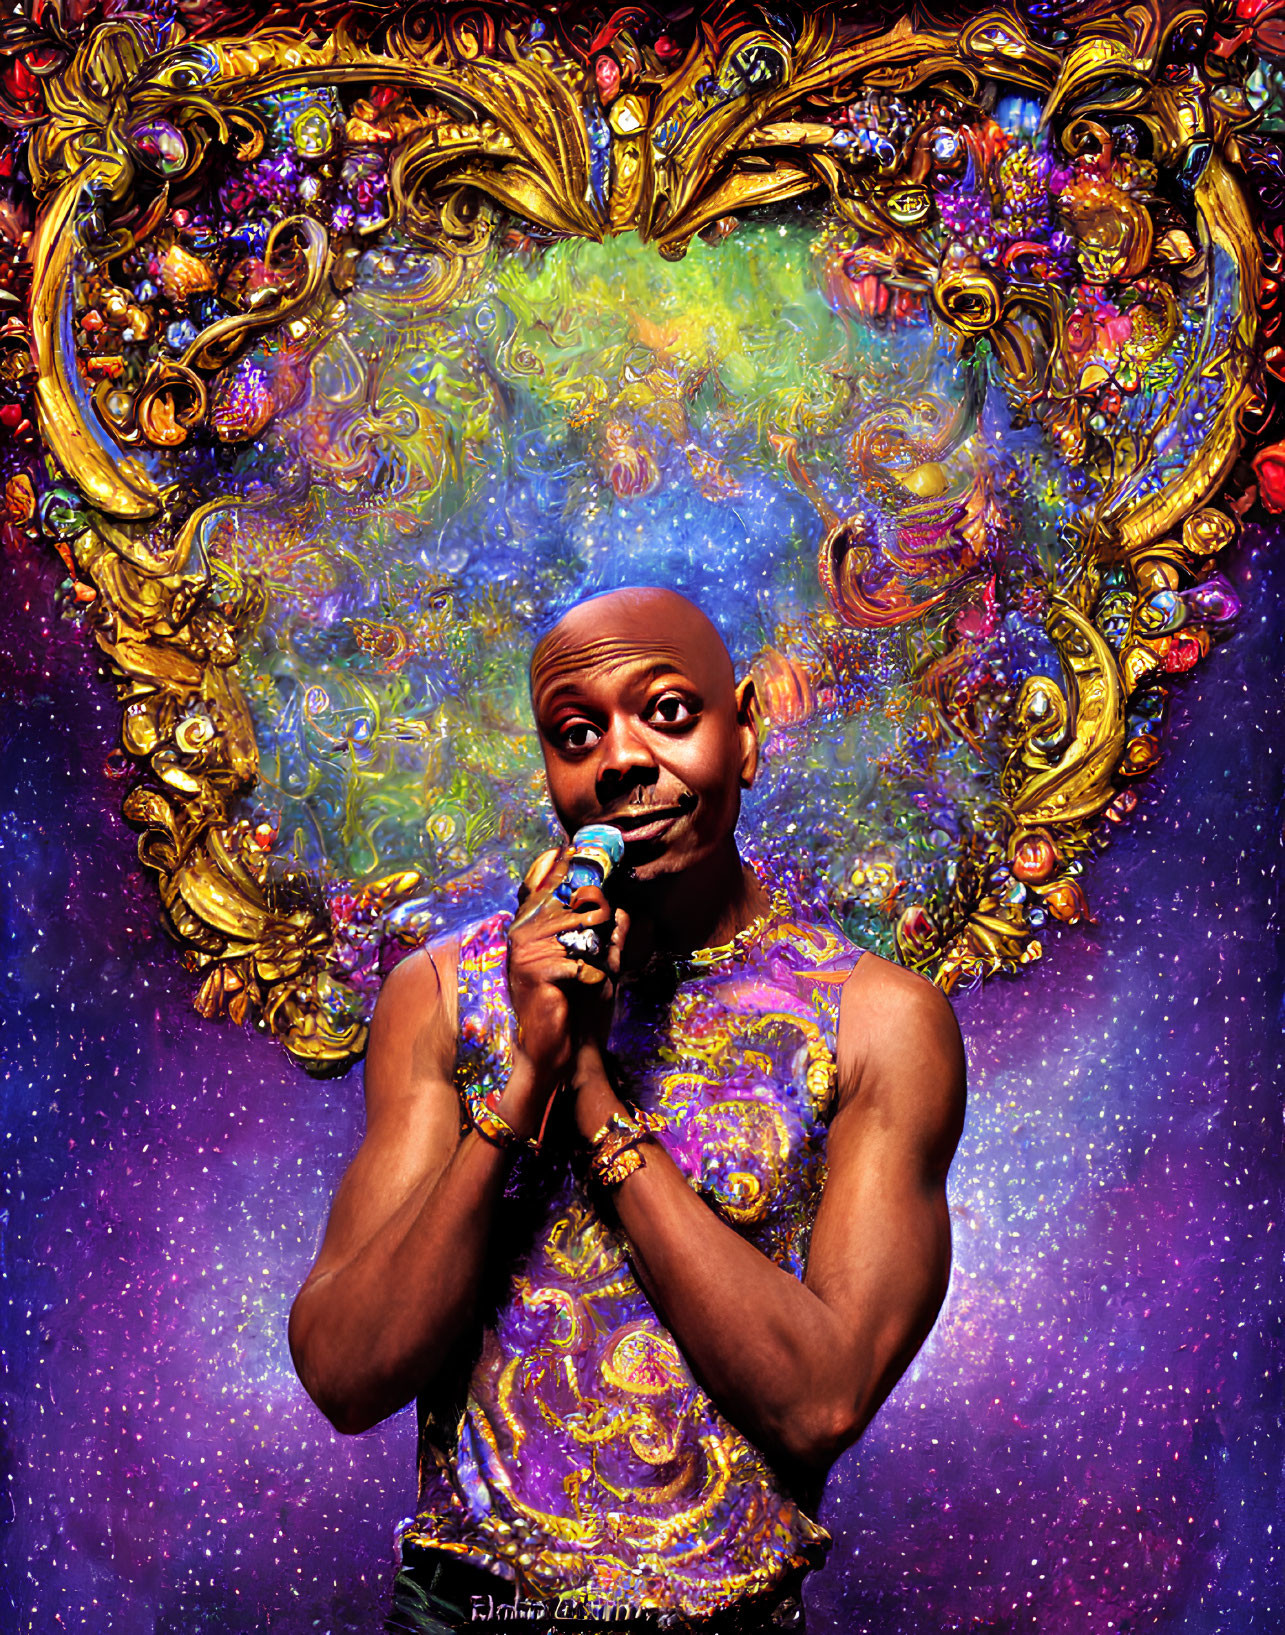 Shaven-headed person in front of cosmic background with golden heart frame and microphone